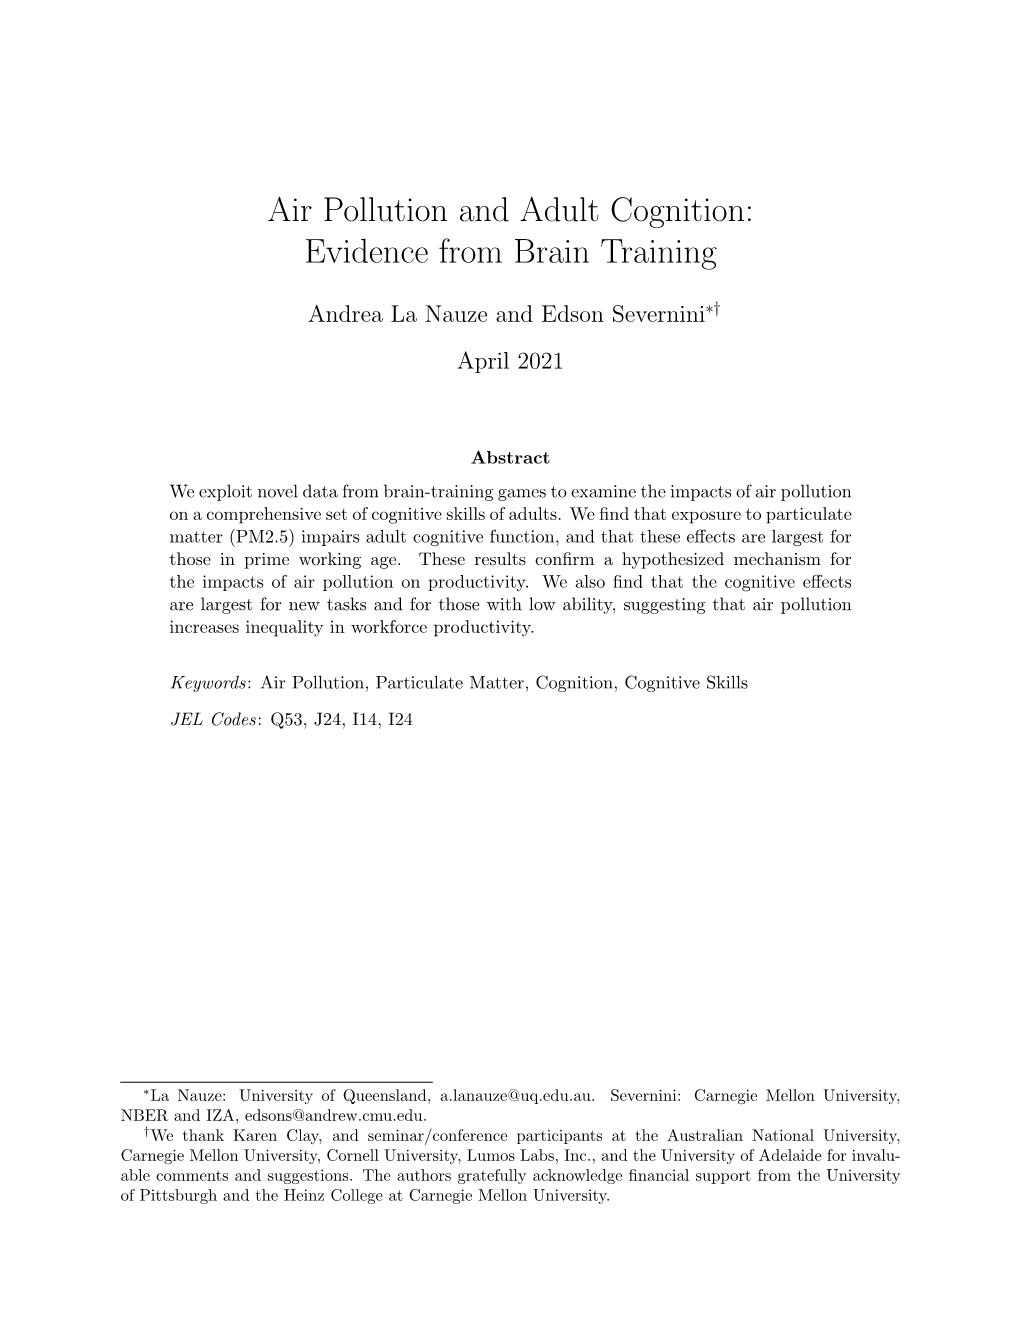 Air Pollution and Adult Cognition: Evidence from Brain Training